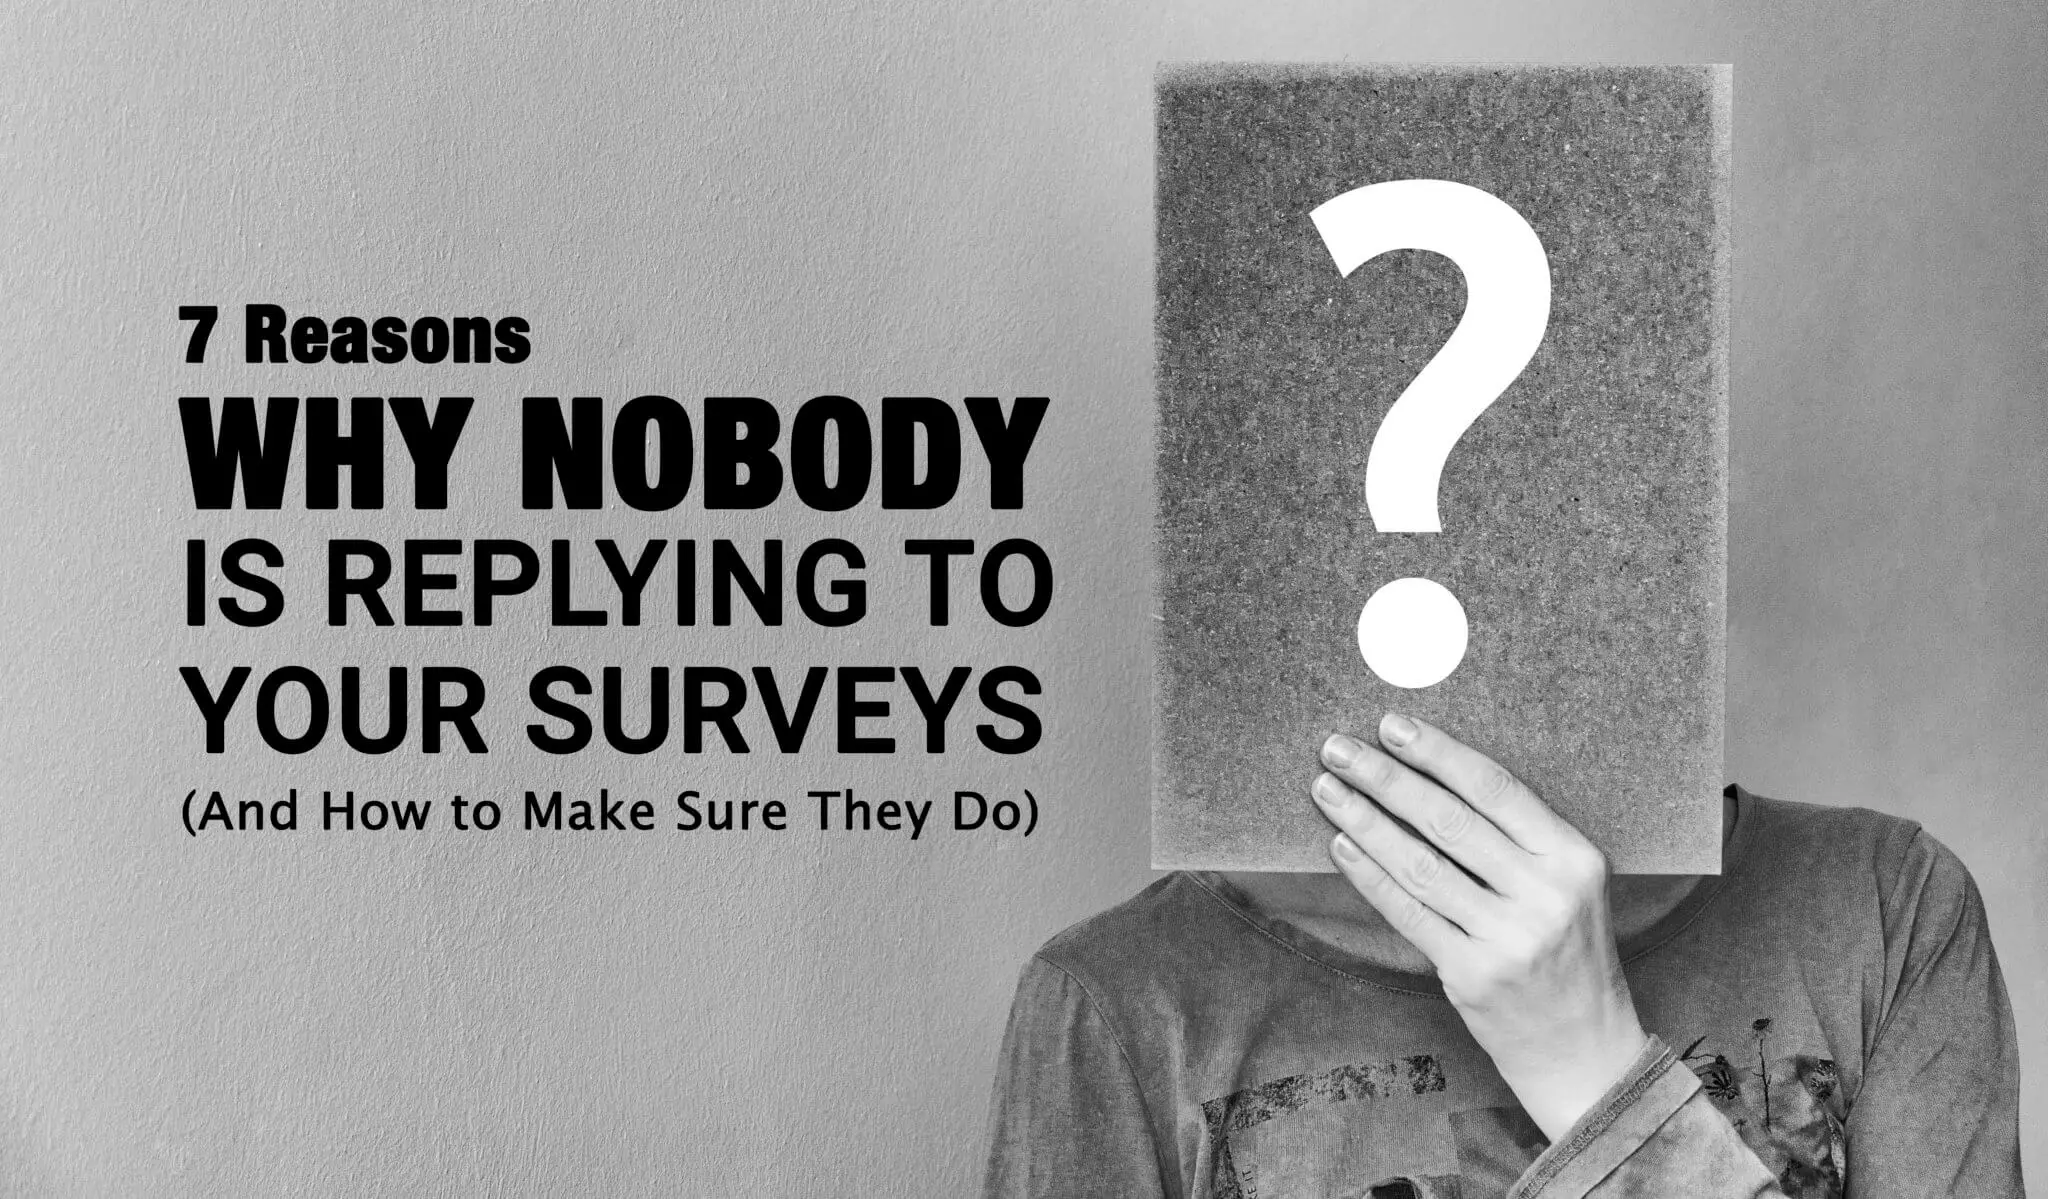 7 Reasons why nobody is replying to your surveys-3b6a8475